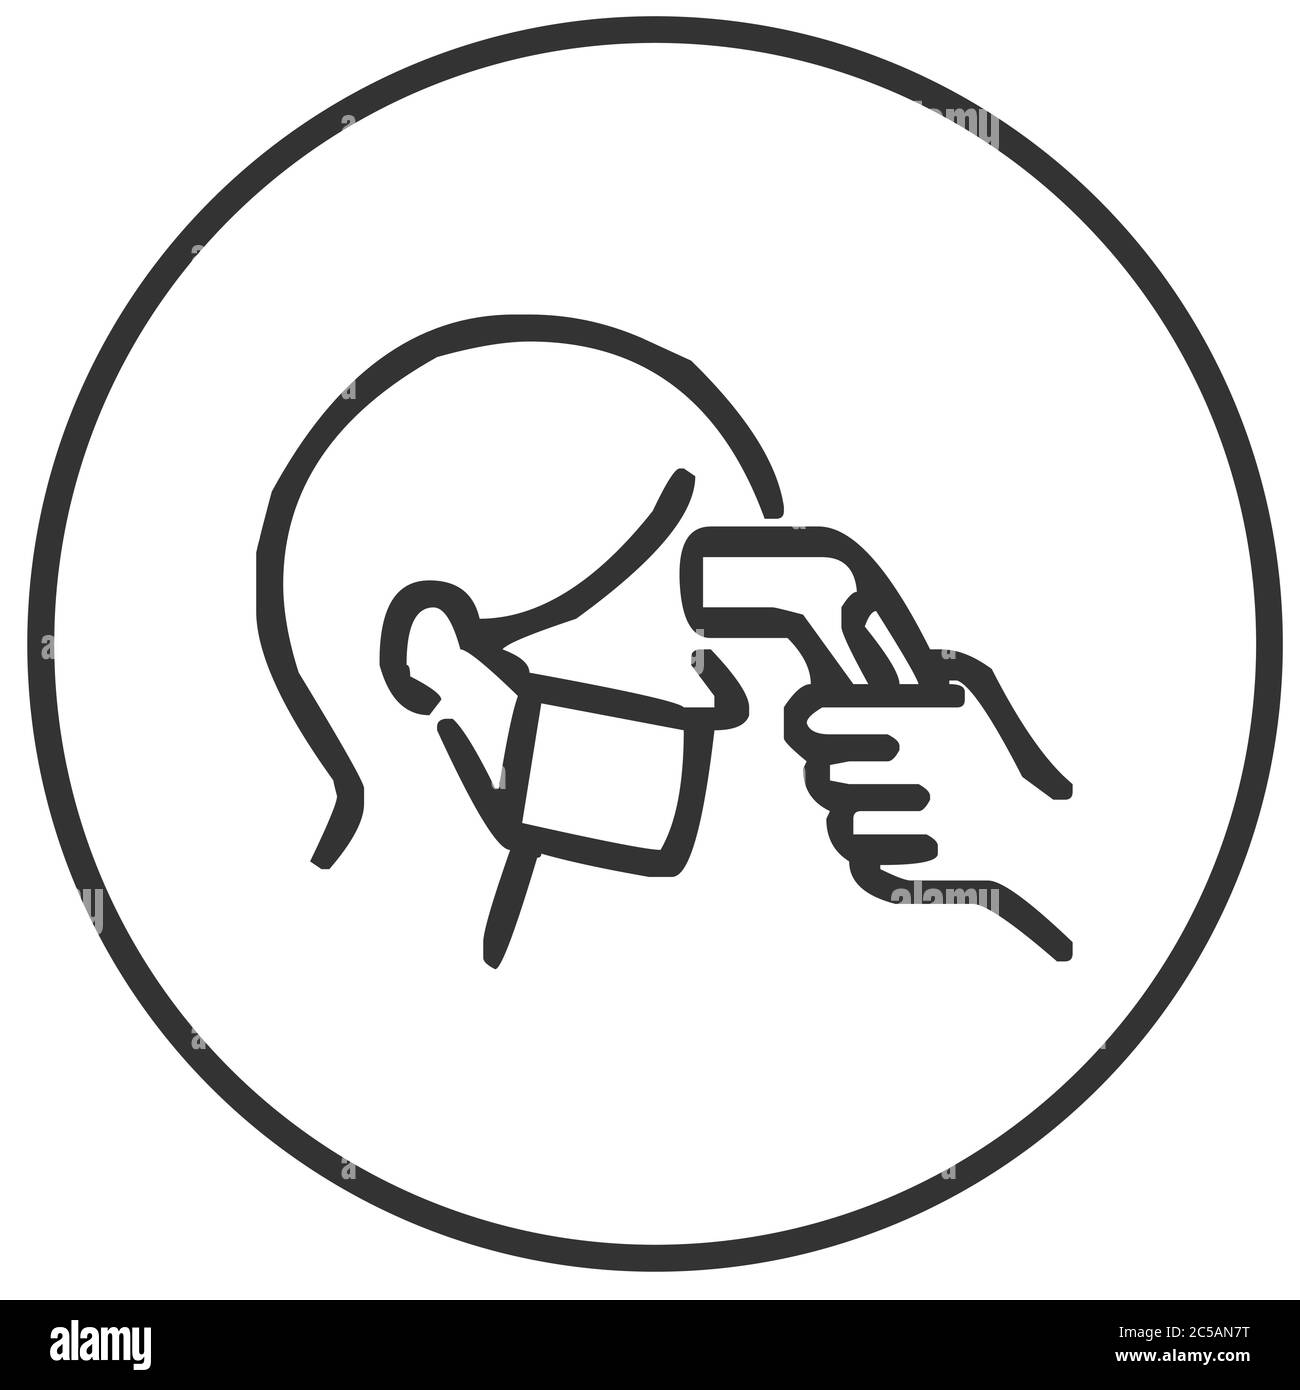 Checking fever with thermal gun icon vector illustration Stock Vector